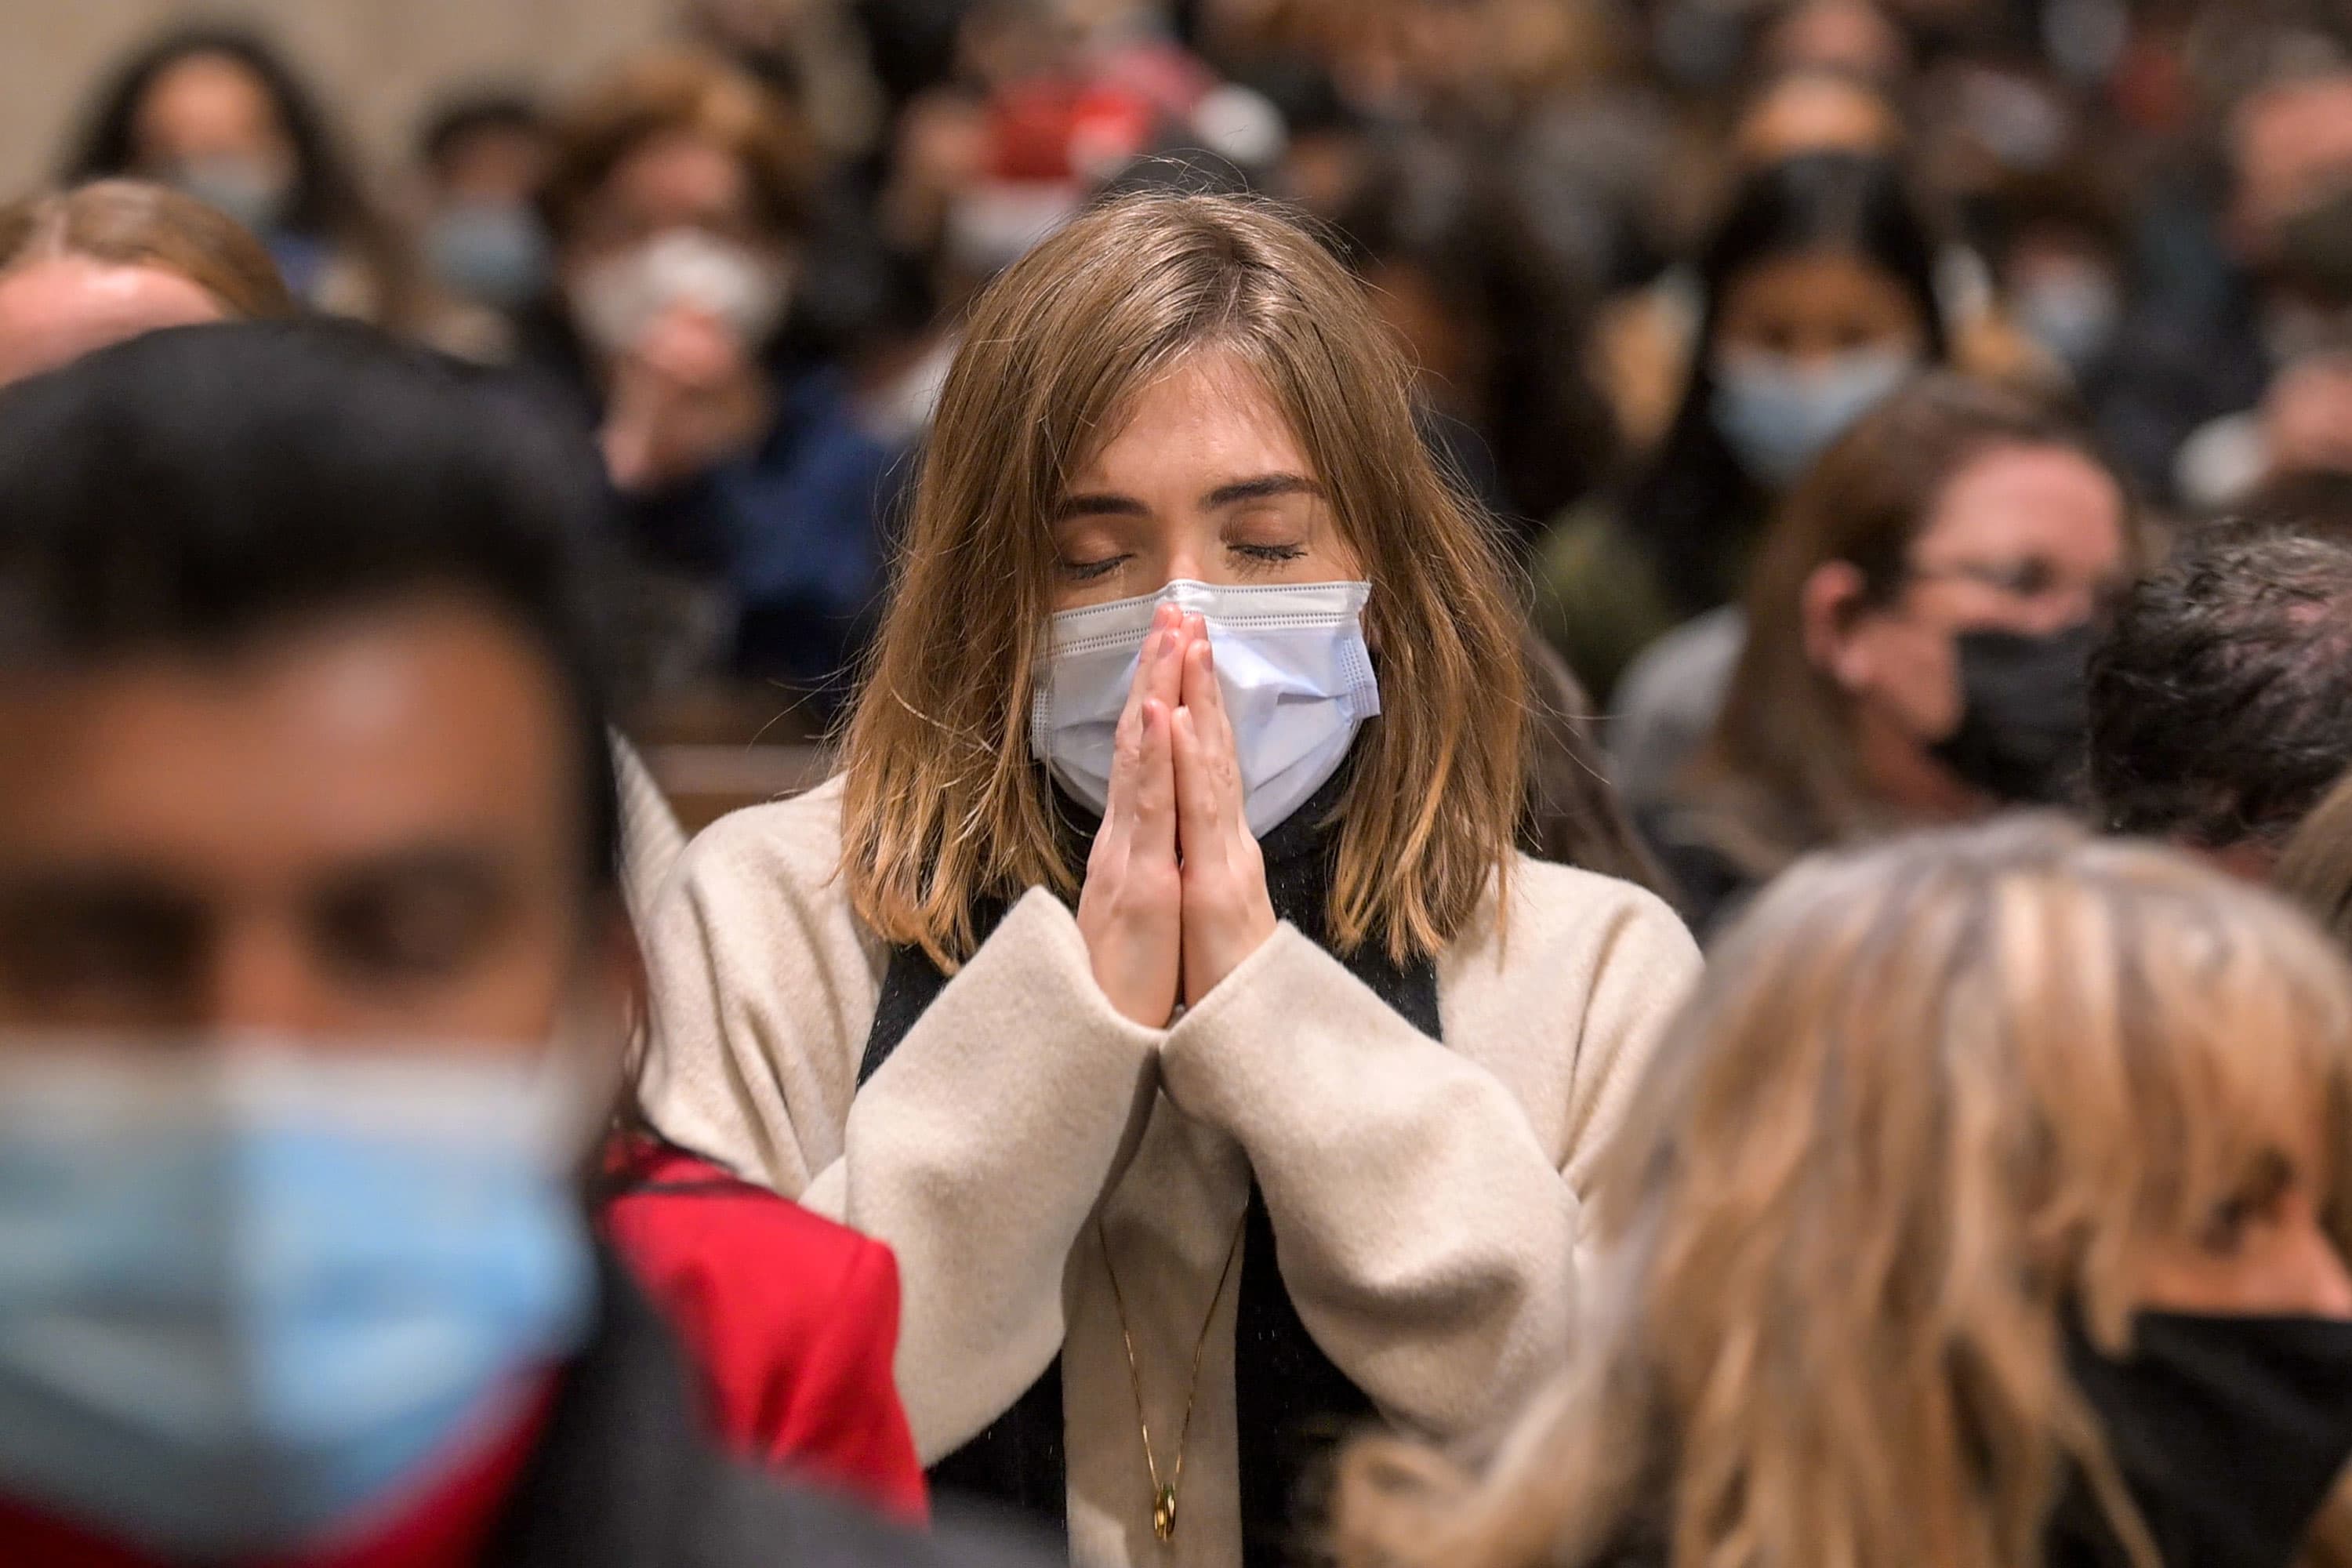 Millennials lead shift away from organized religion as pandemic tests